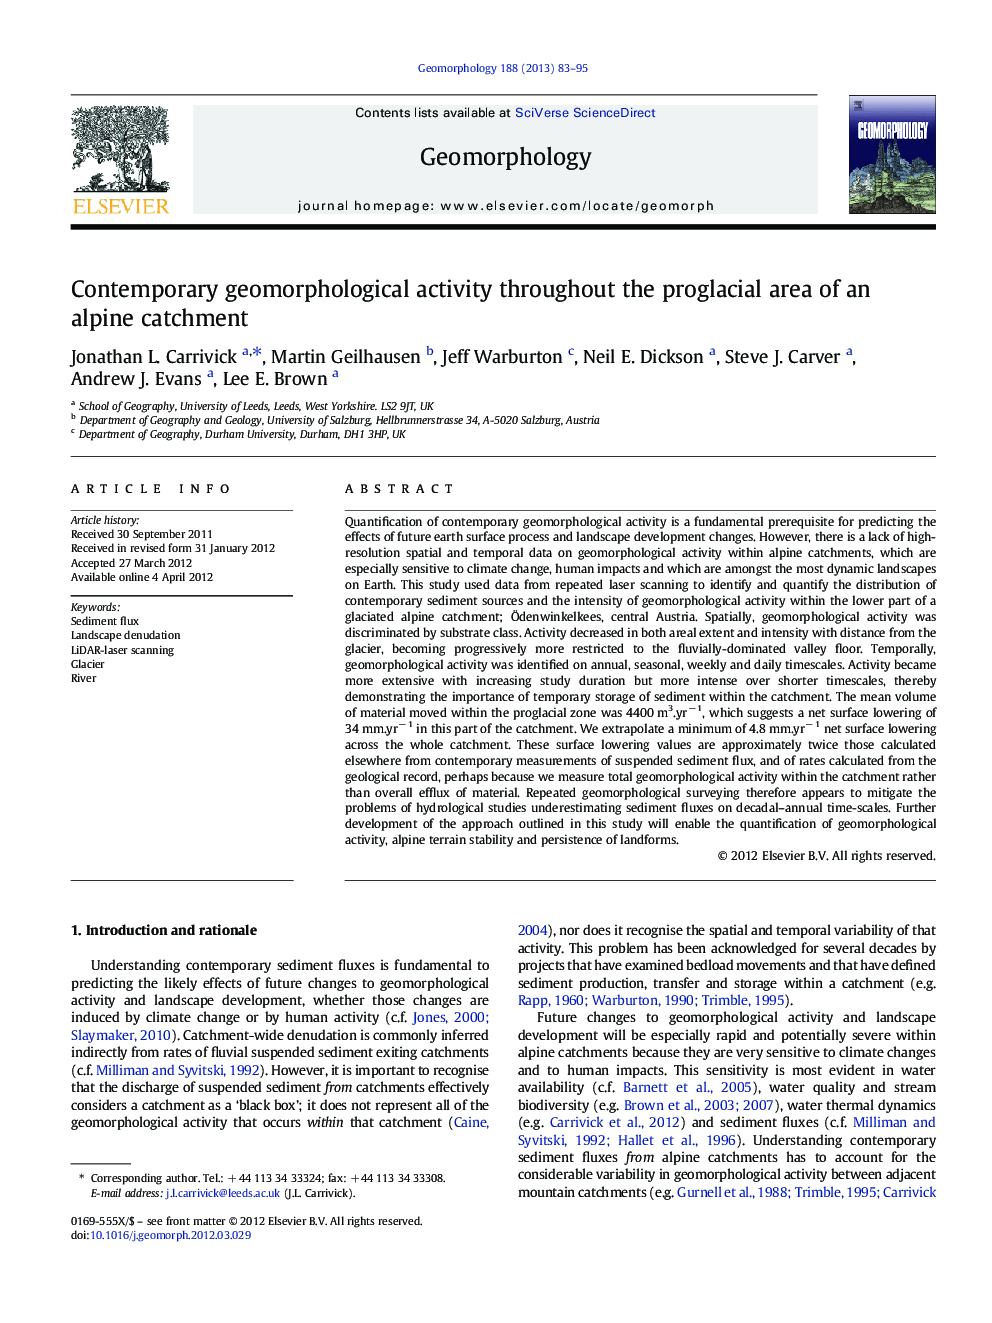 Contemporary geomorphological activity throughout the proglacial area of an alpine catchment